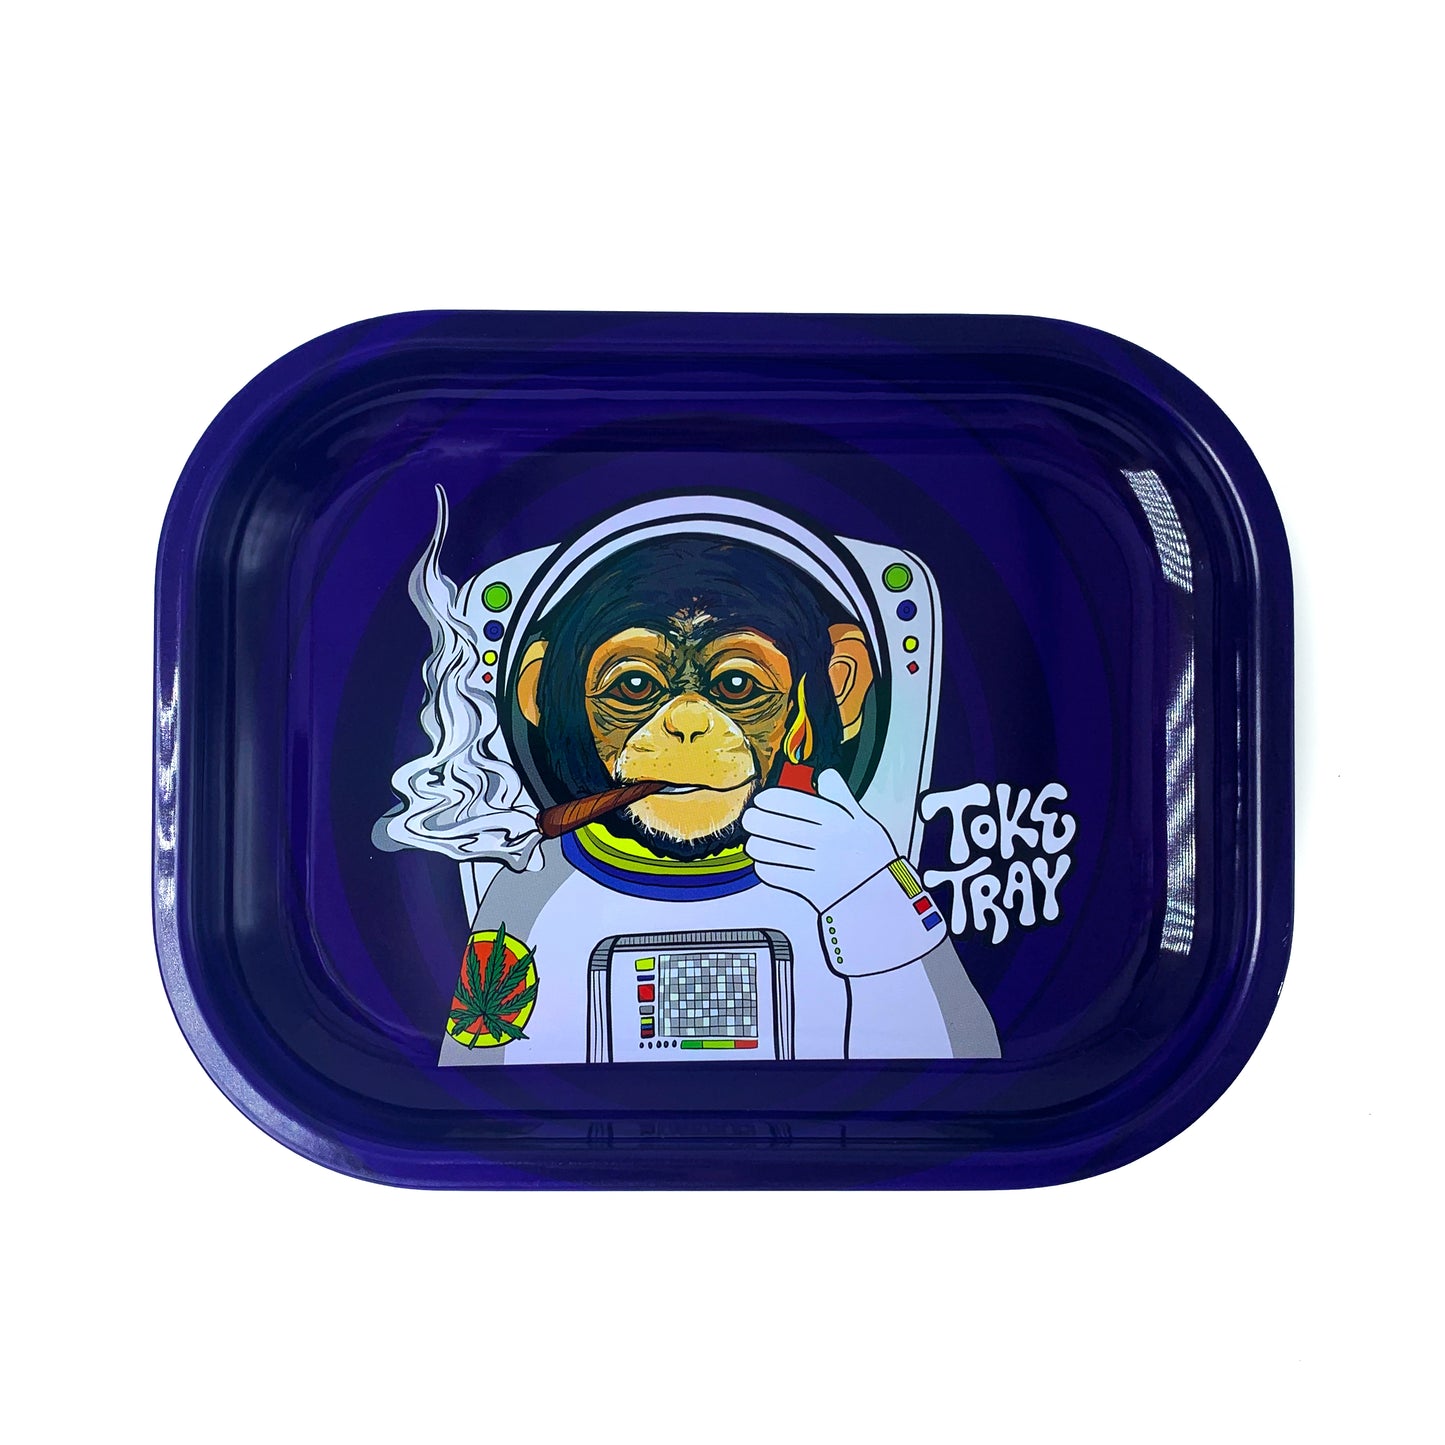 Space Monkey Rolling Tray Set | With Pink Grinder and Raw Rolling Papers